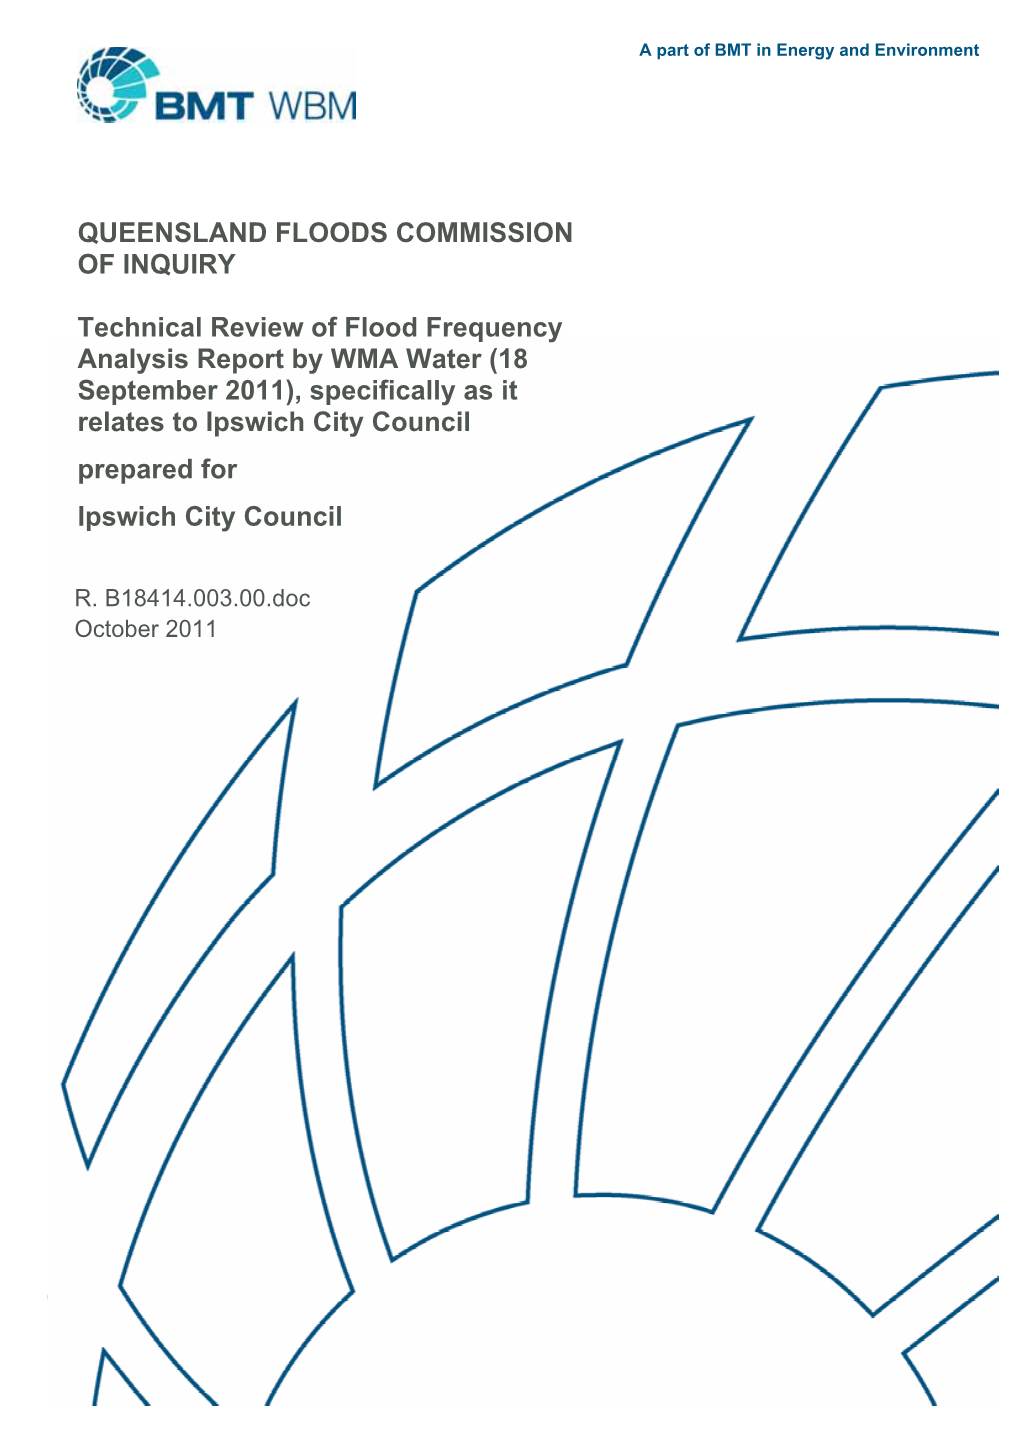 QUEENSLAND FLOODS COMMISSION of INQUIRY Technical Review of Flood Frequency Analysis Report by WMA Water (18 September 2011), Sp